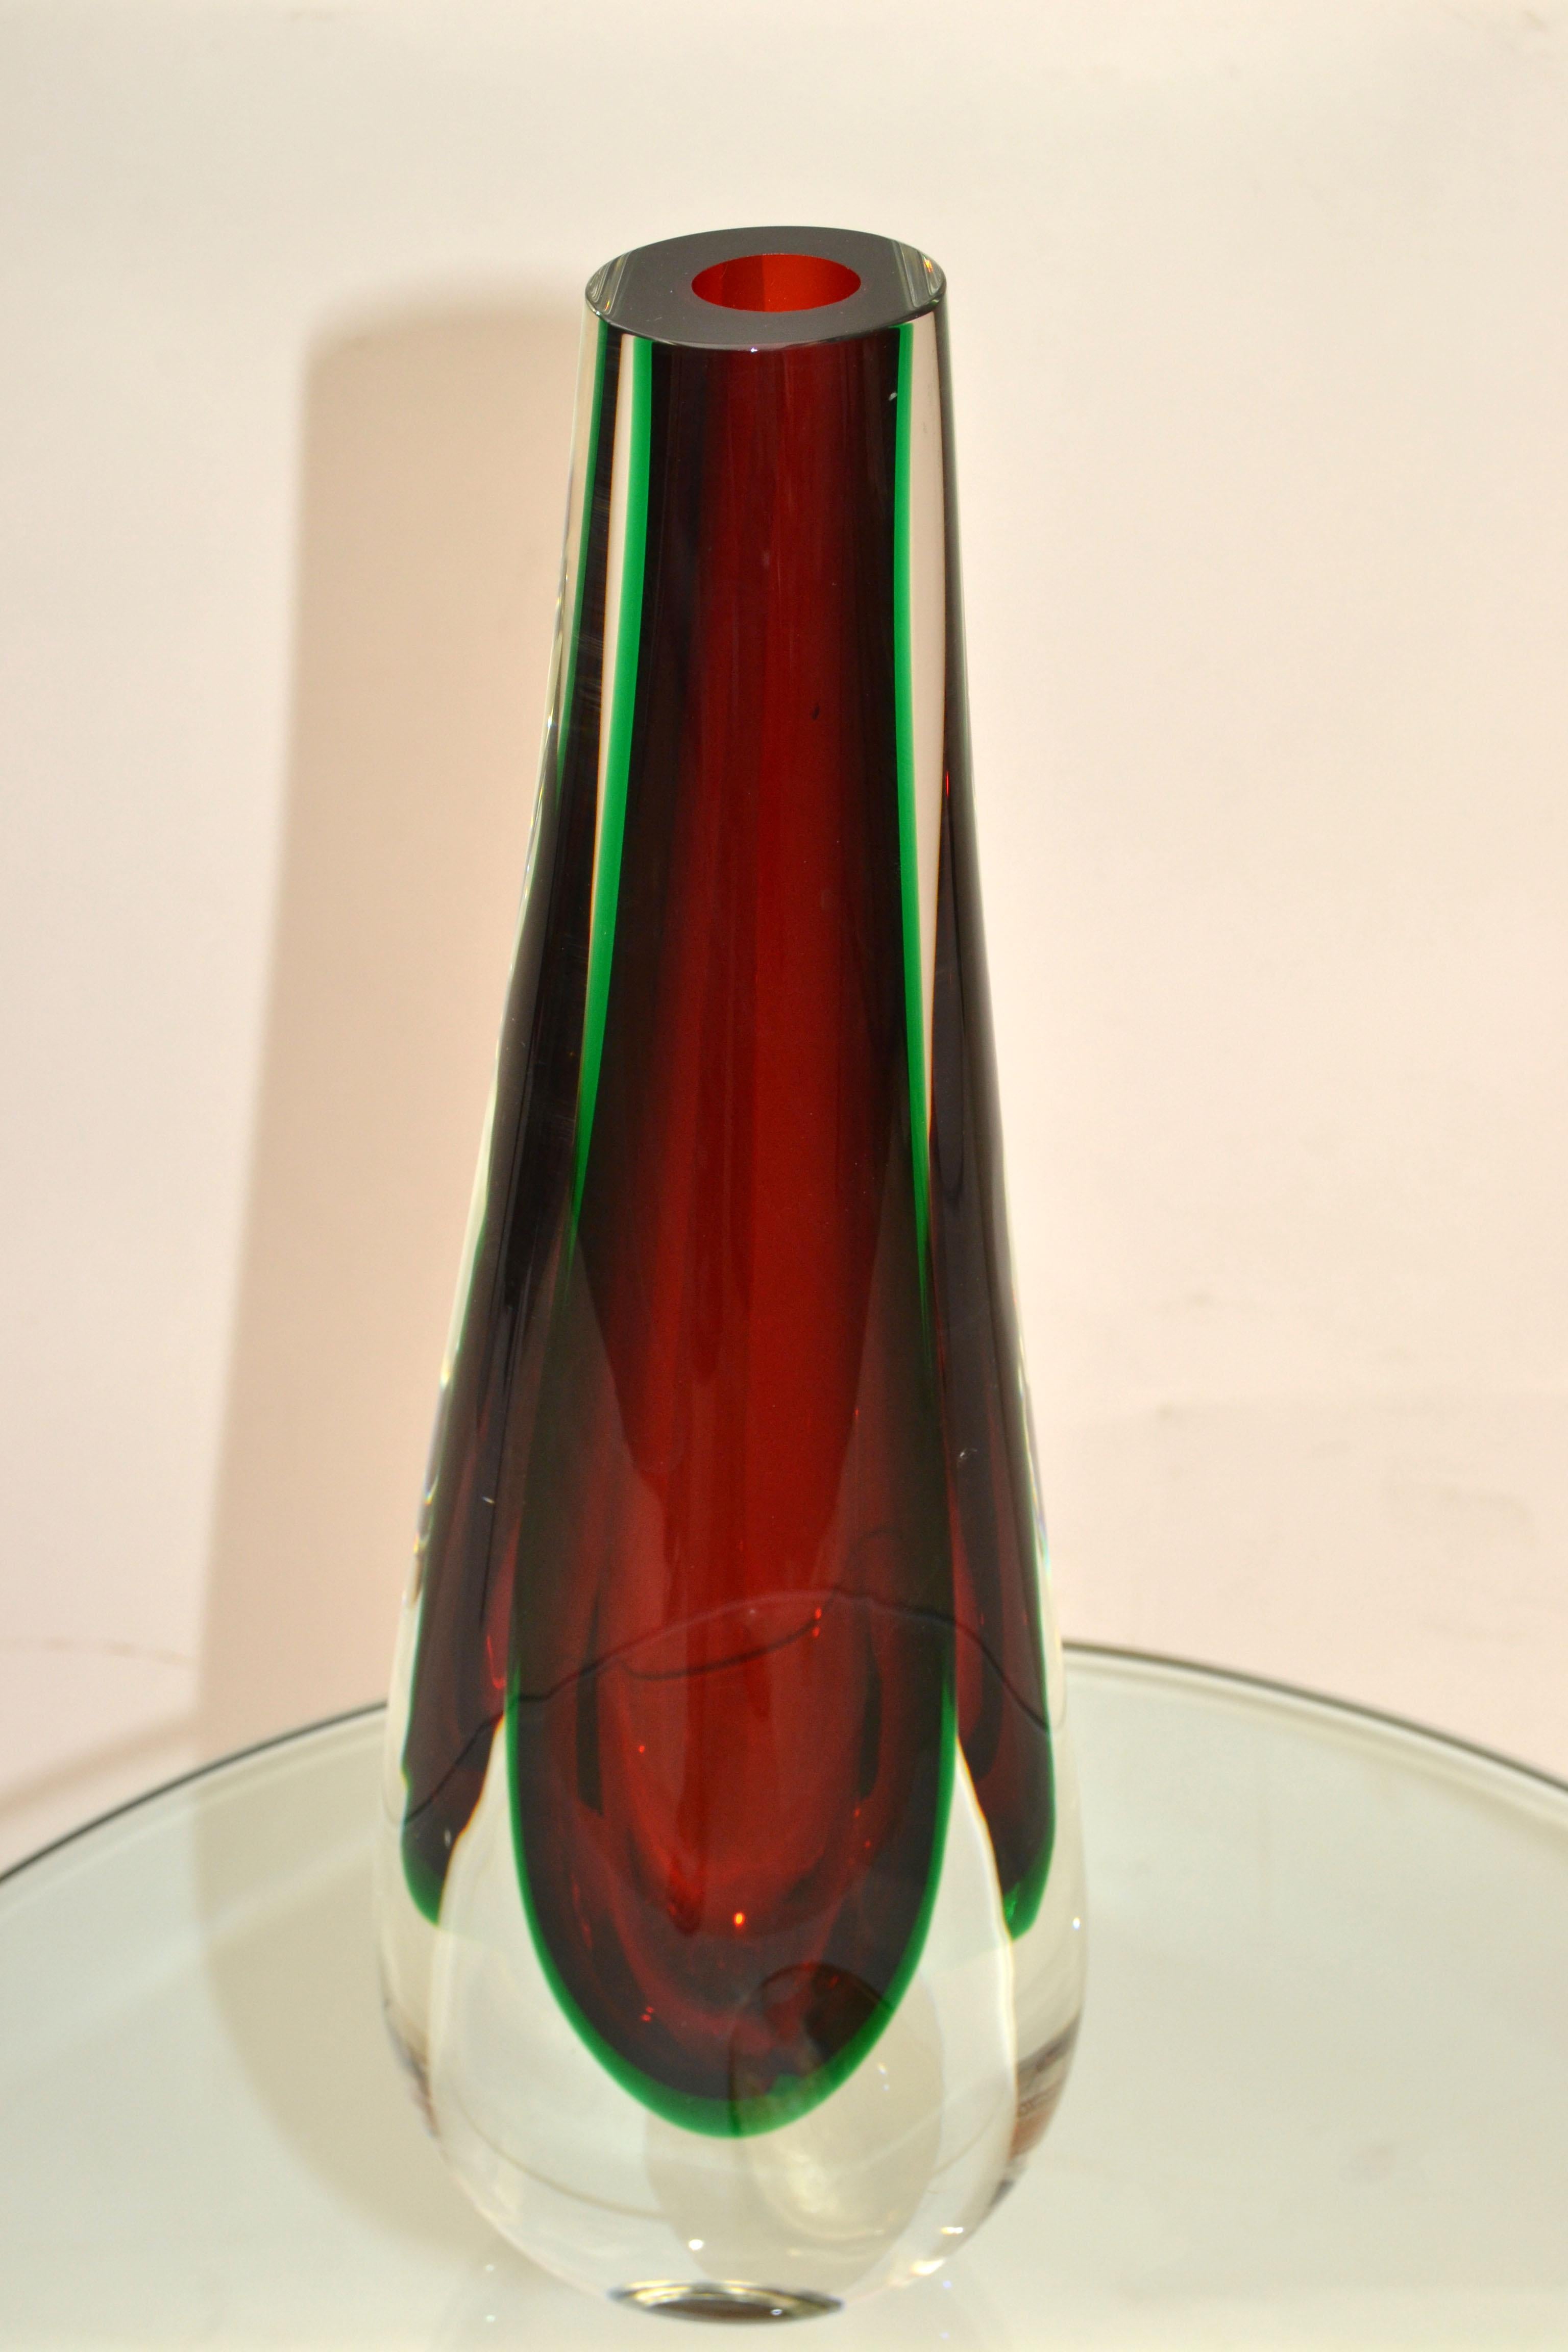 Flavio Poli Sommerso Murano Glass Vase 3 Encased Colors Red, Green Clear Seguso  For Sale 4